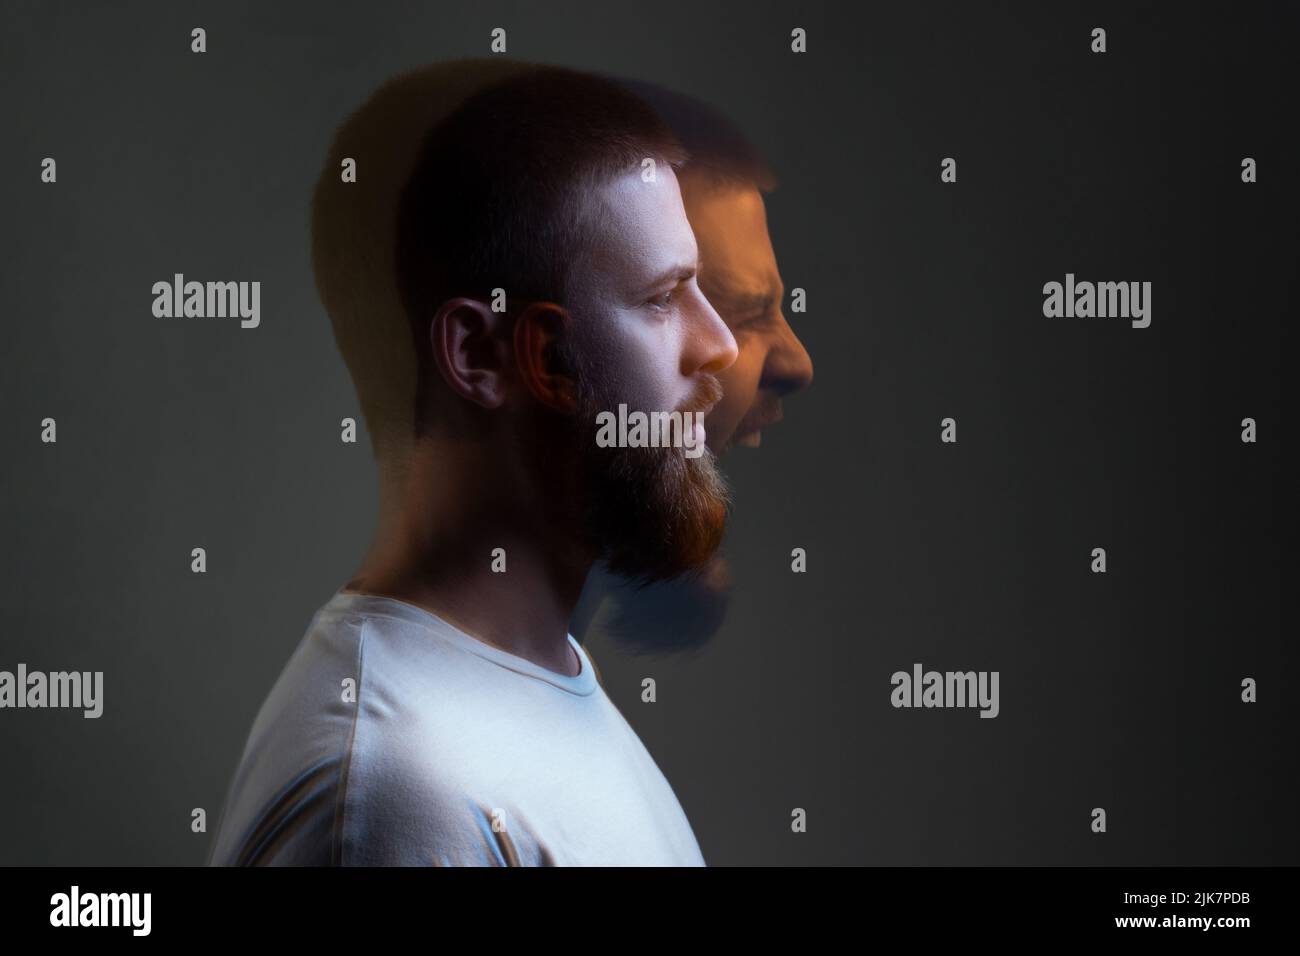 Side view portrait of two-faced man in calm serious and angry screaming expression. Different emotion inside and outside mood. Internally suffering, dissociative identity disorder. Double exposure. Stock Photo